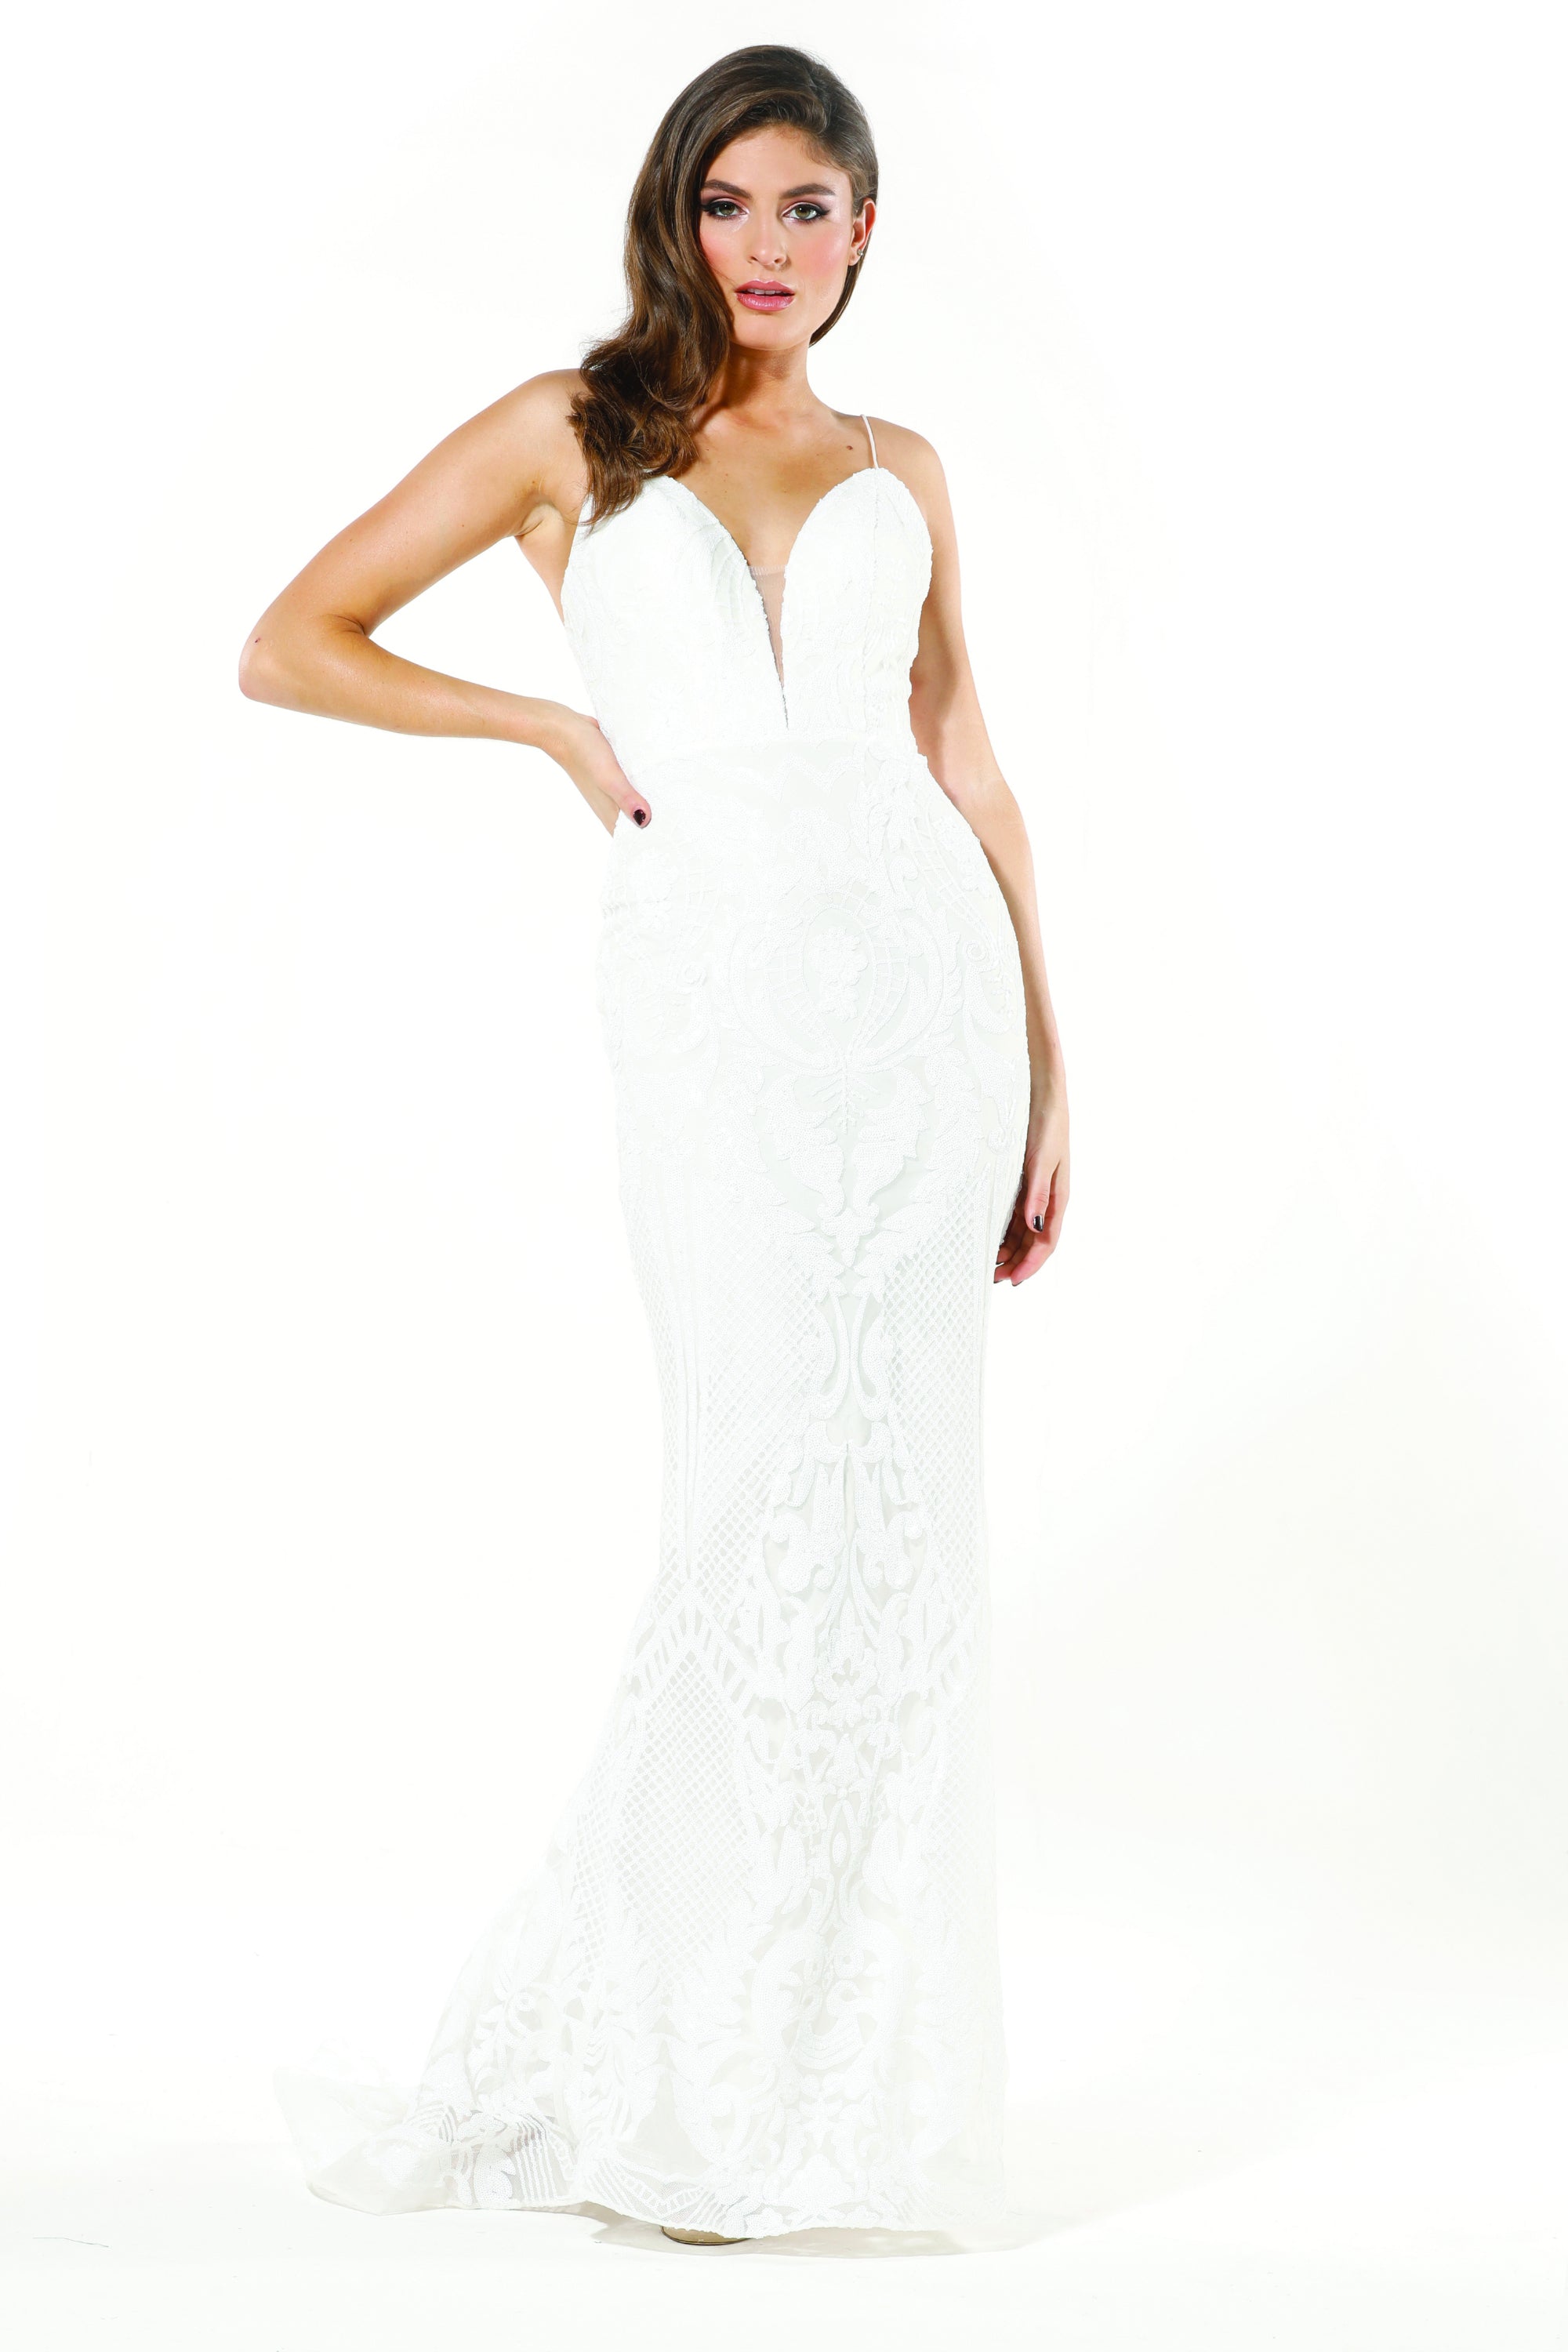 Tinaholy Couture T19280 White &amp; White Wedding Mermaid Formal Dress Tina Holly Couture$ AfterPay Humm ZipPay LayBuy Sezzle